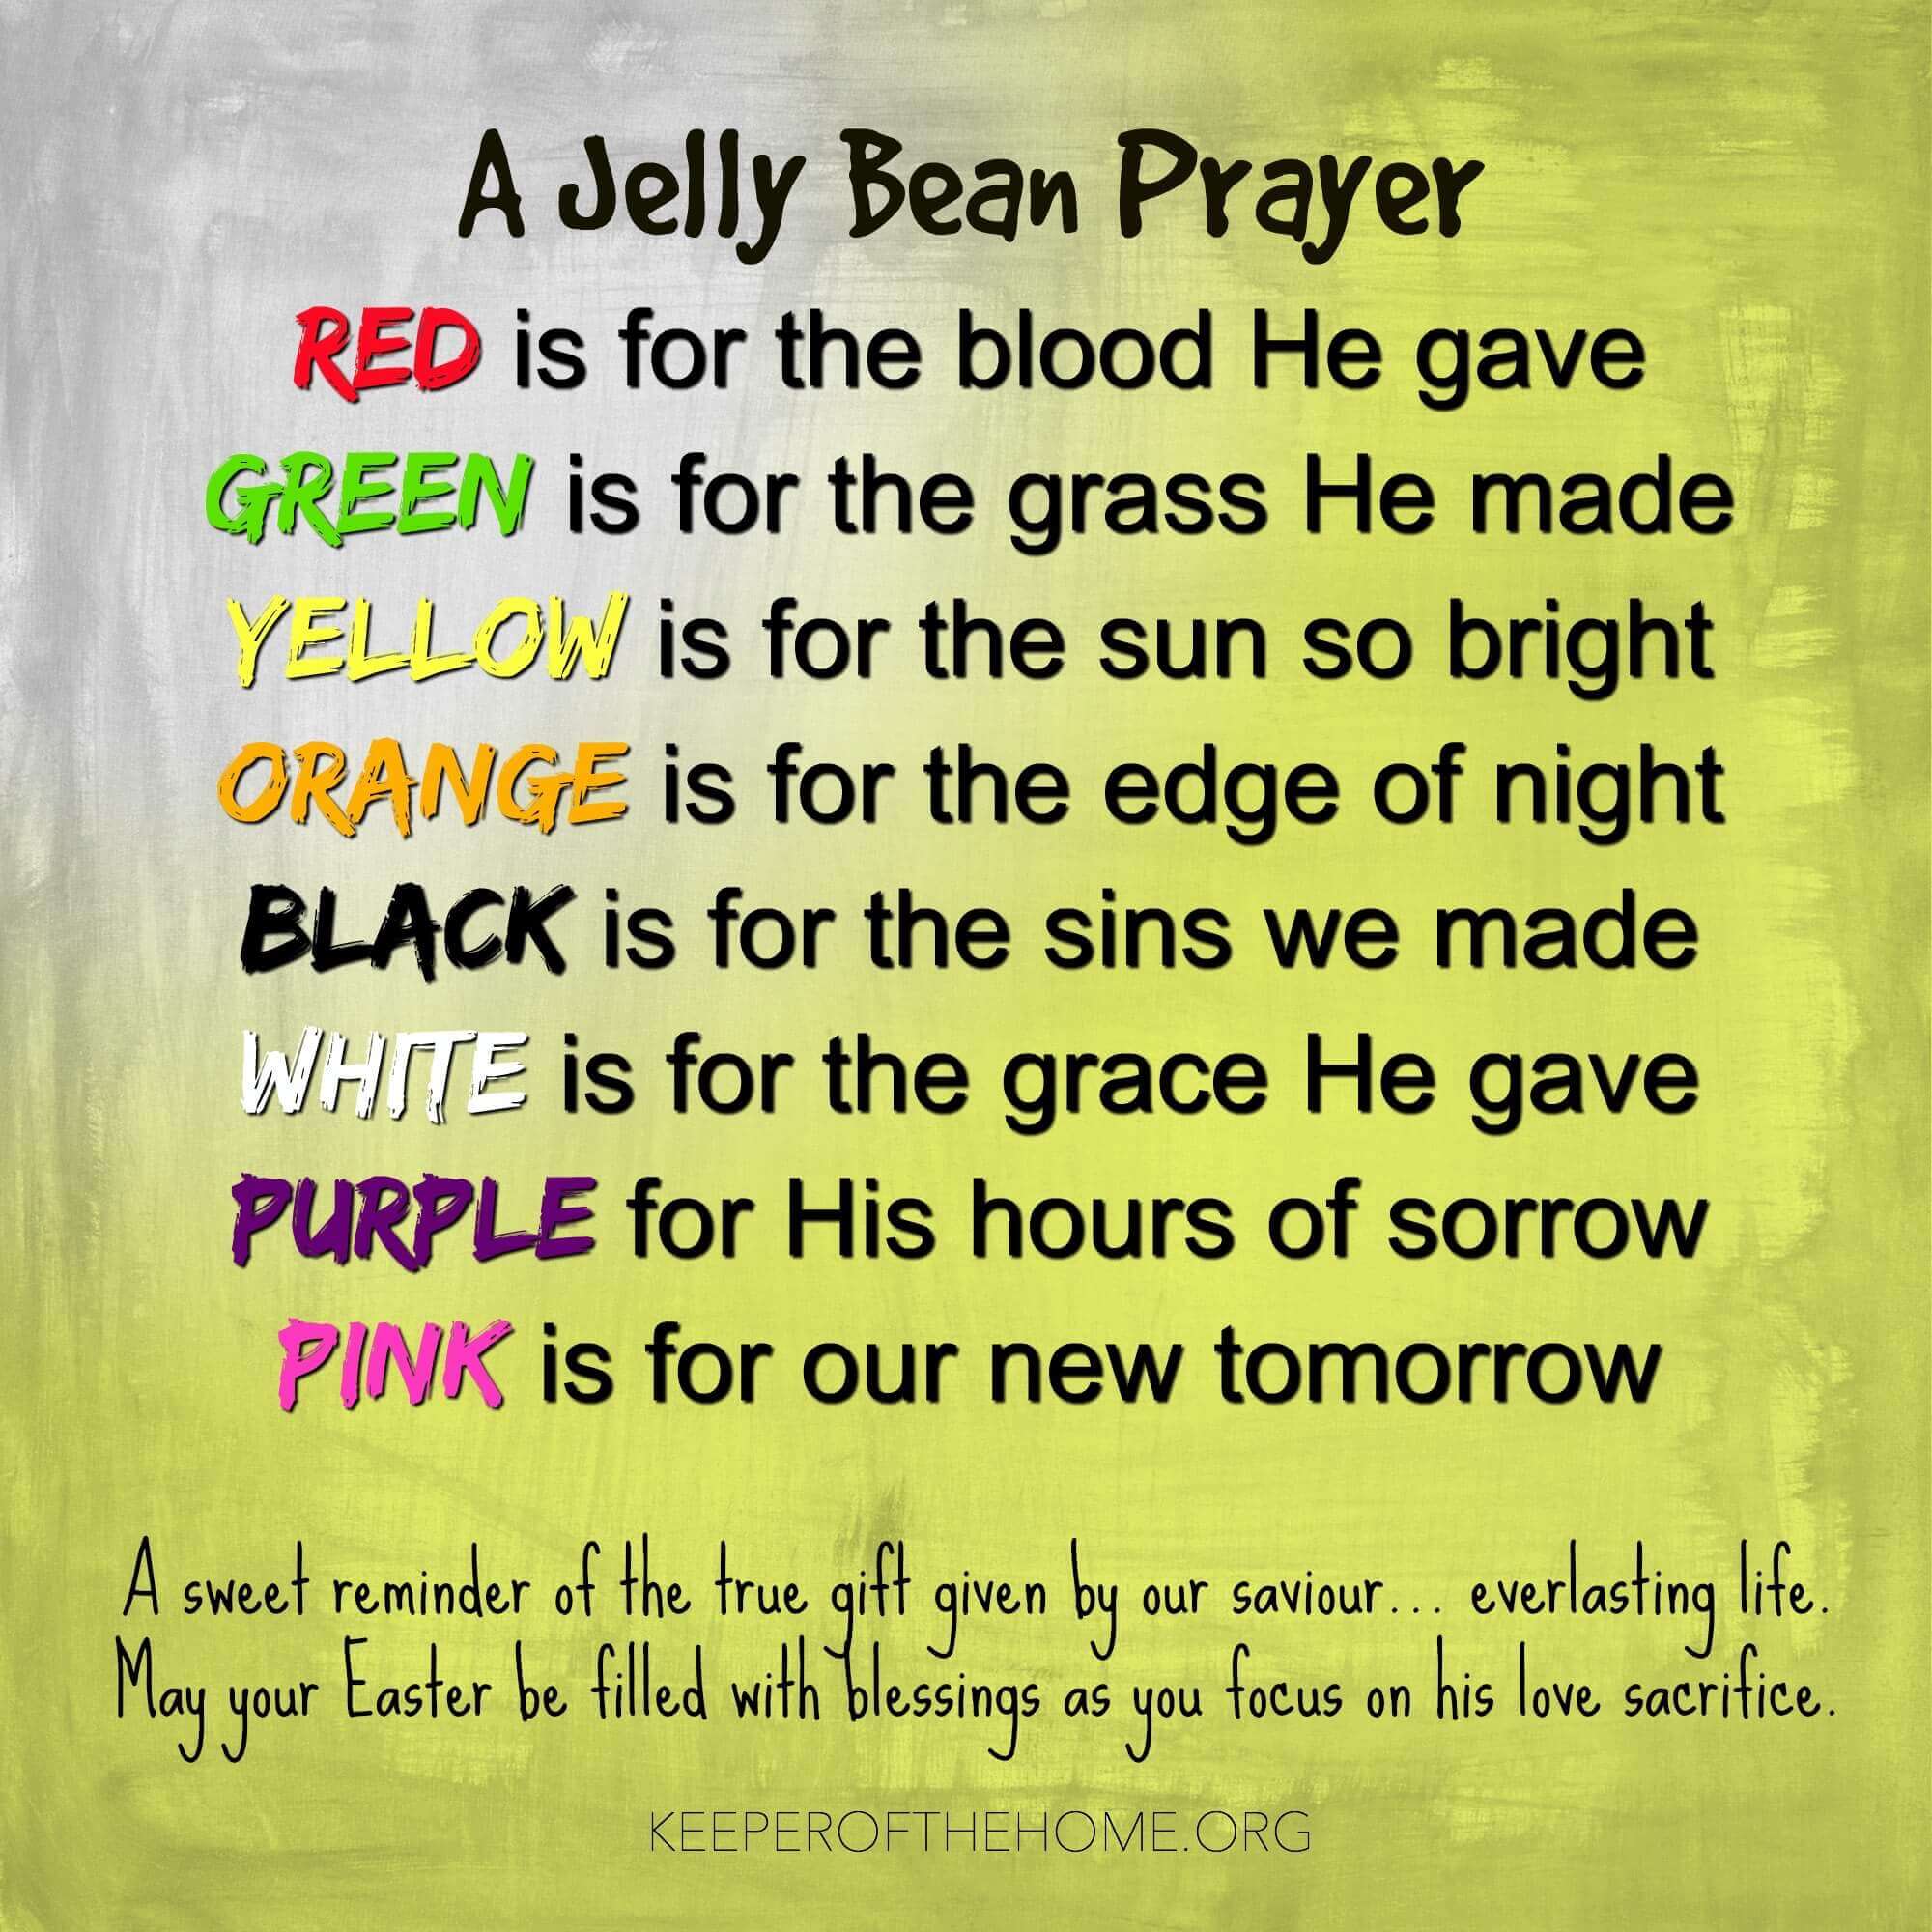 The Jelly Bean Prayer is a sweet way to make the Easter story come to life.